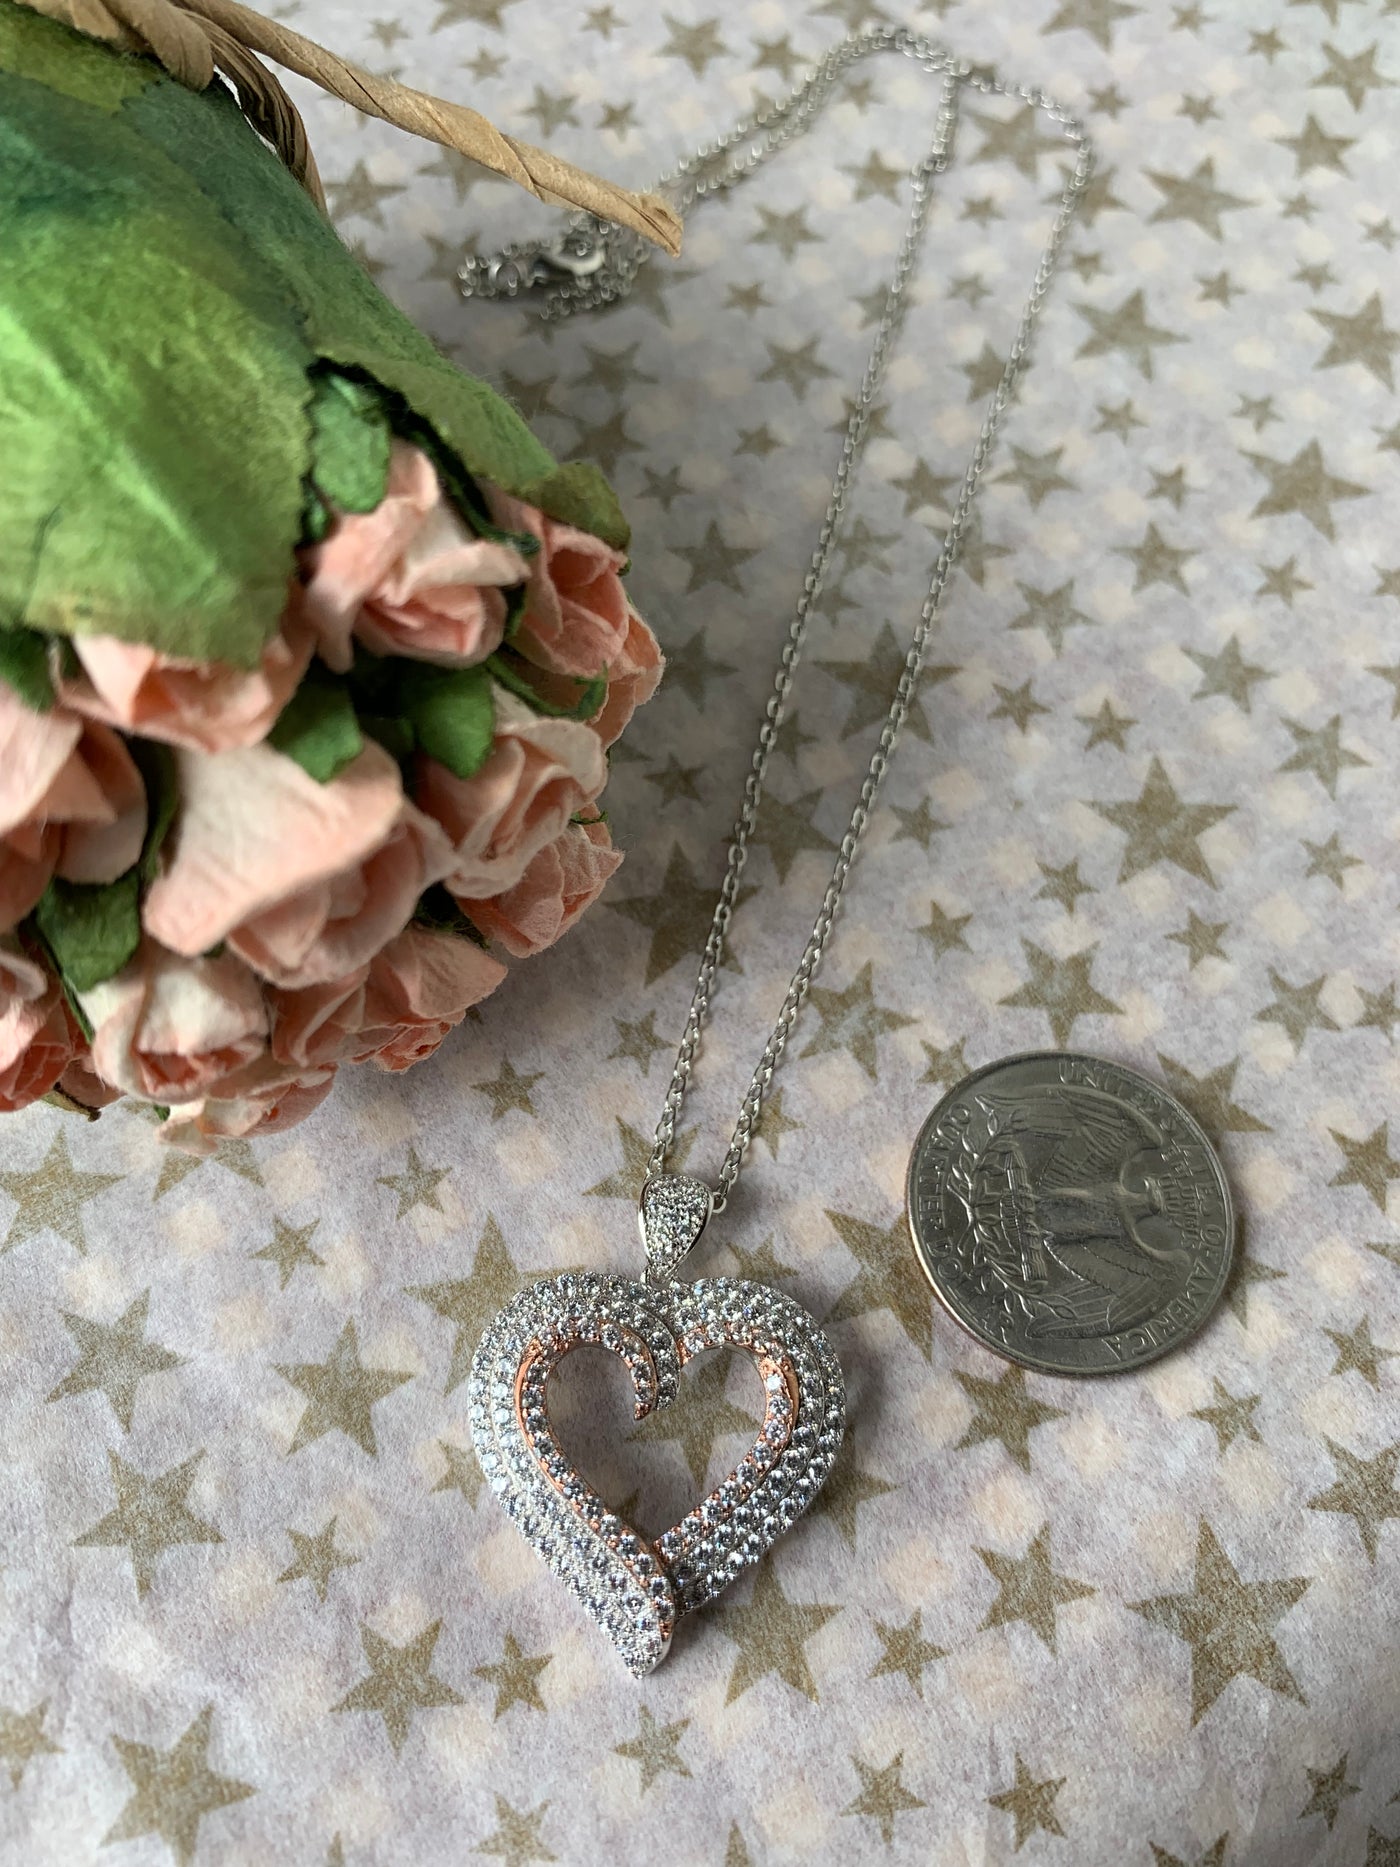 Cut Out Heart Pendant Decorated with Pave Set Cubic Zirconia